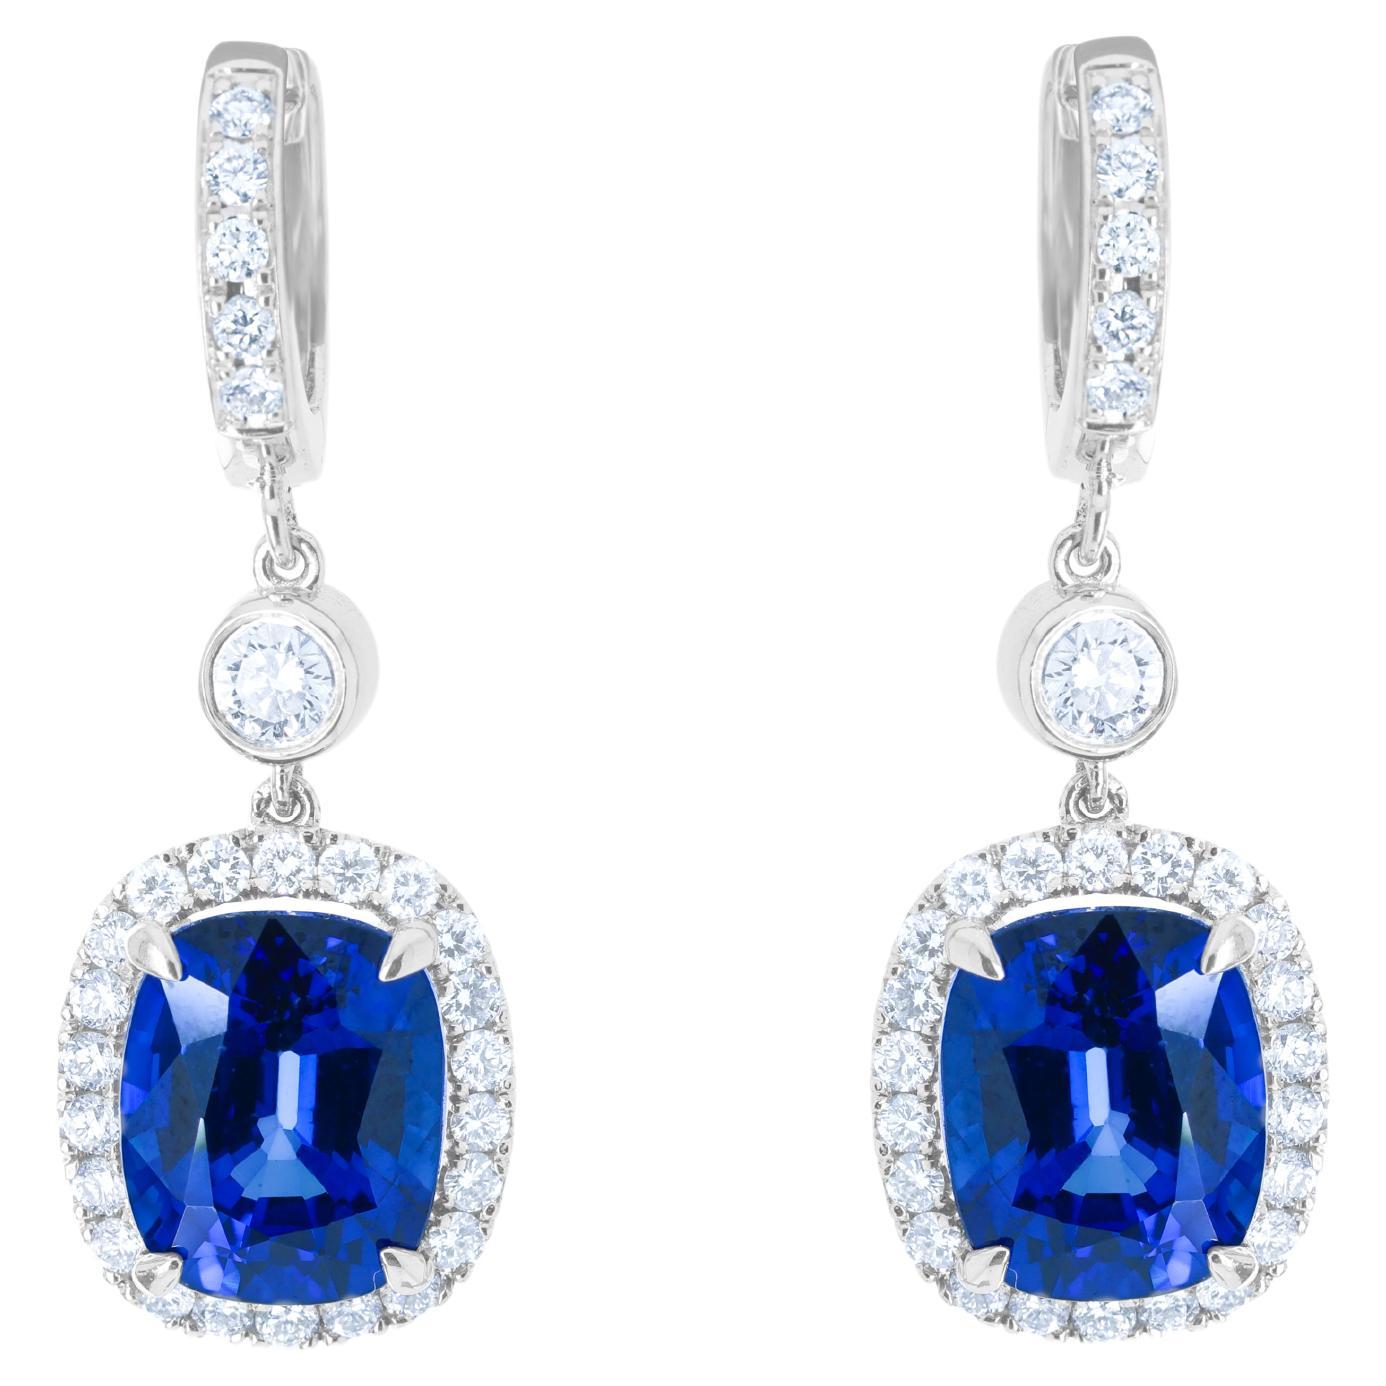 Diana M. Sapphire Drop Earrings 8.46ct Corn Flower Blue Set With 1.10cts Of Halo For Sale